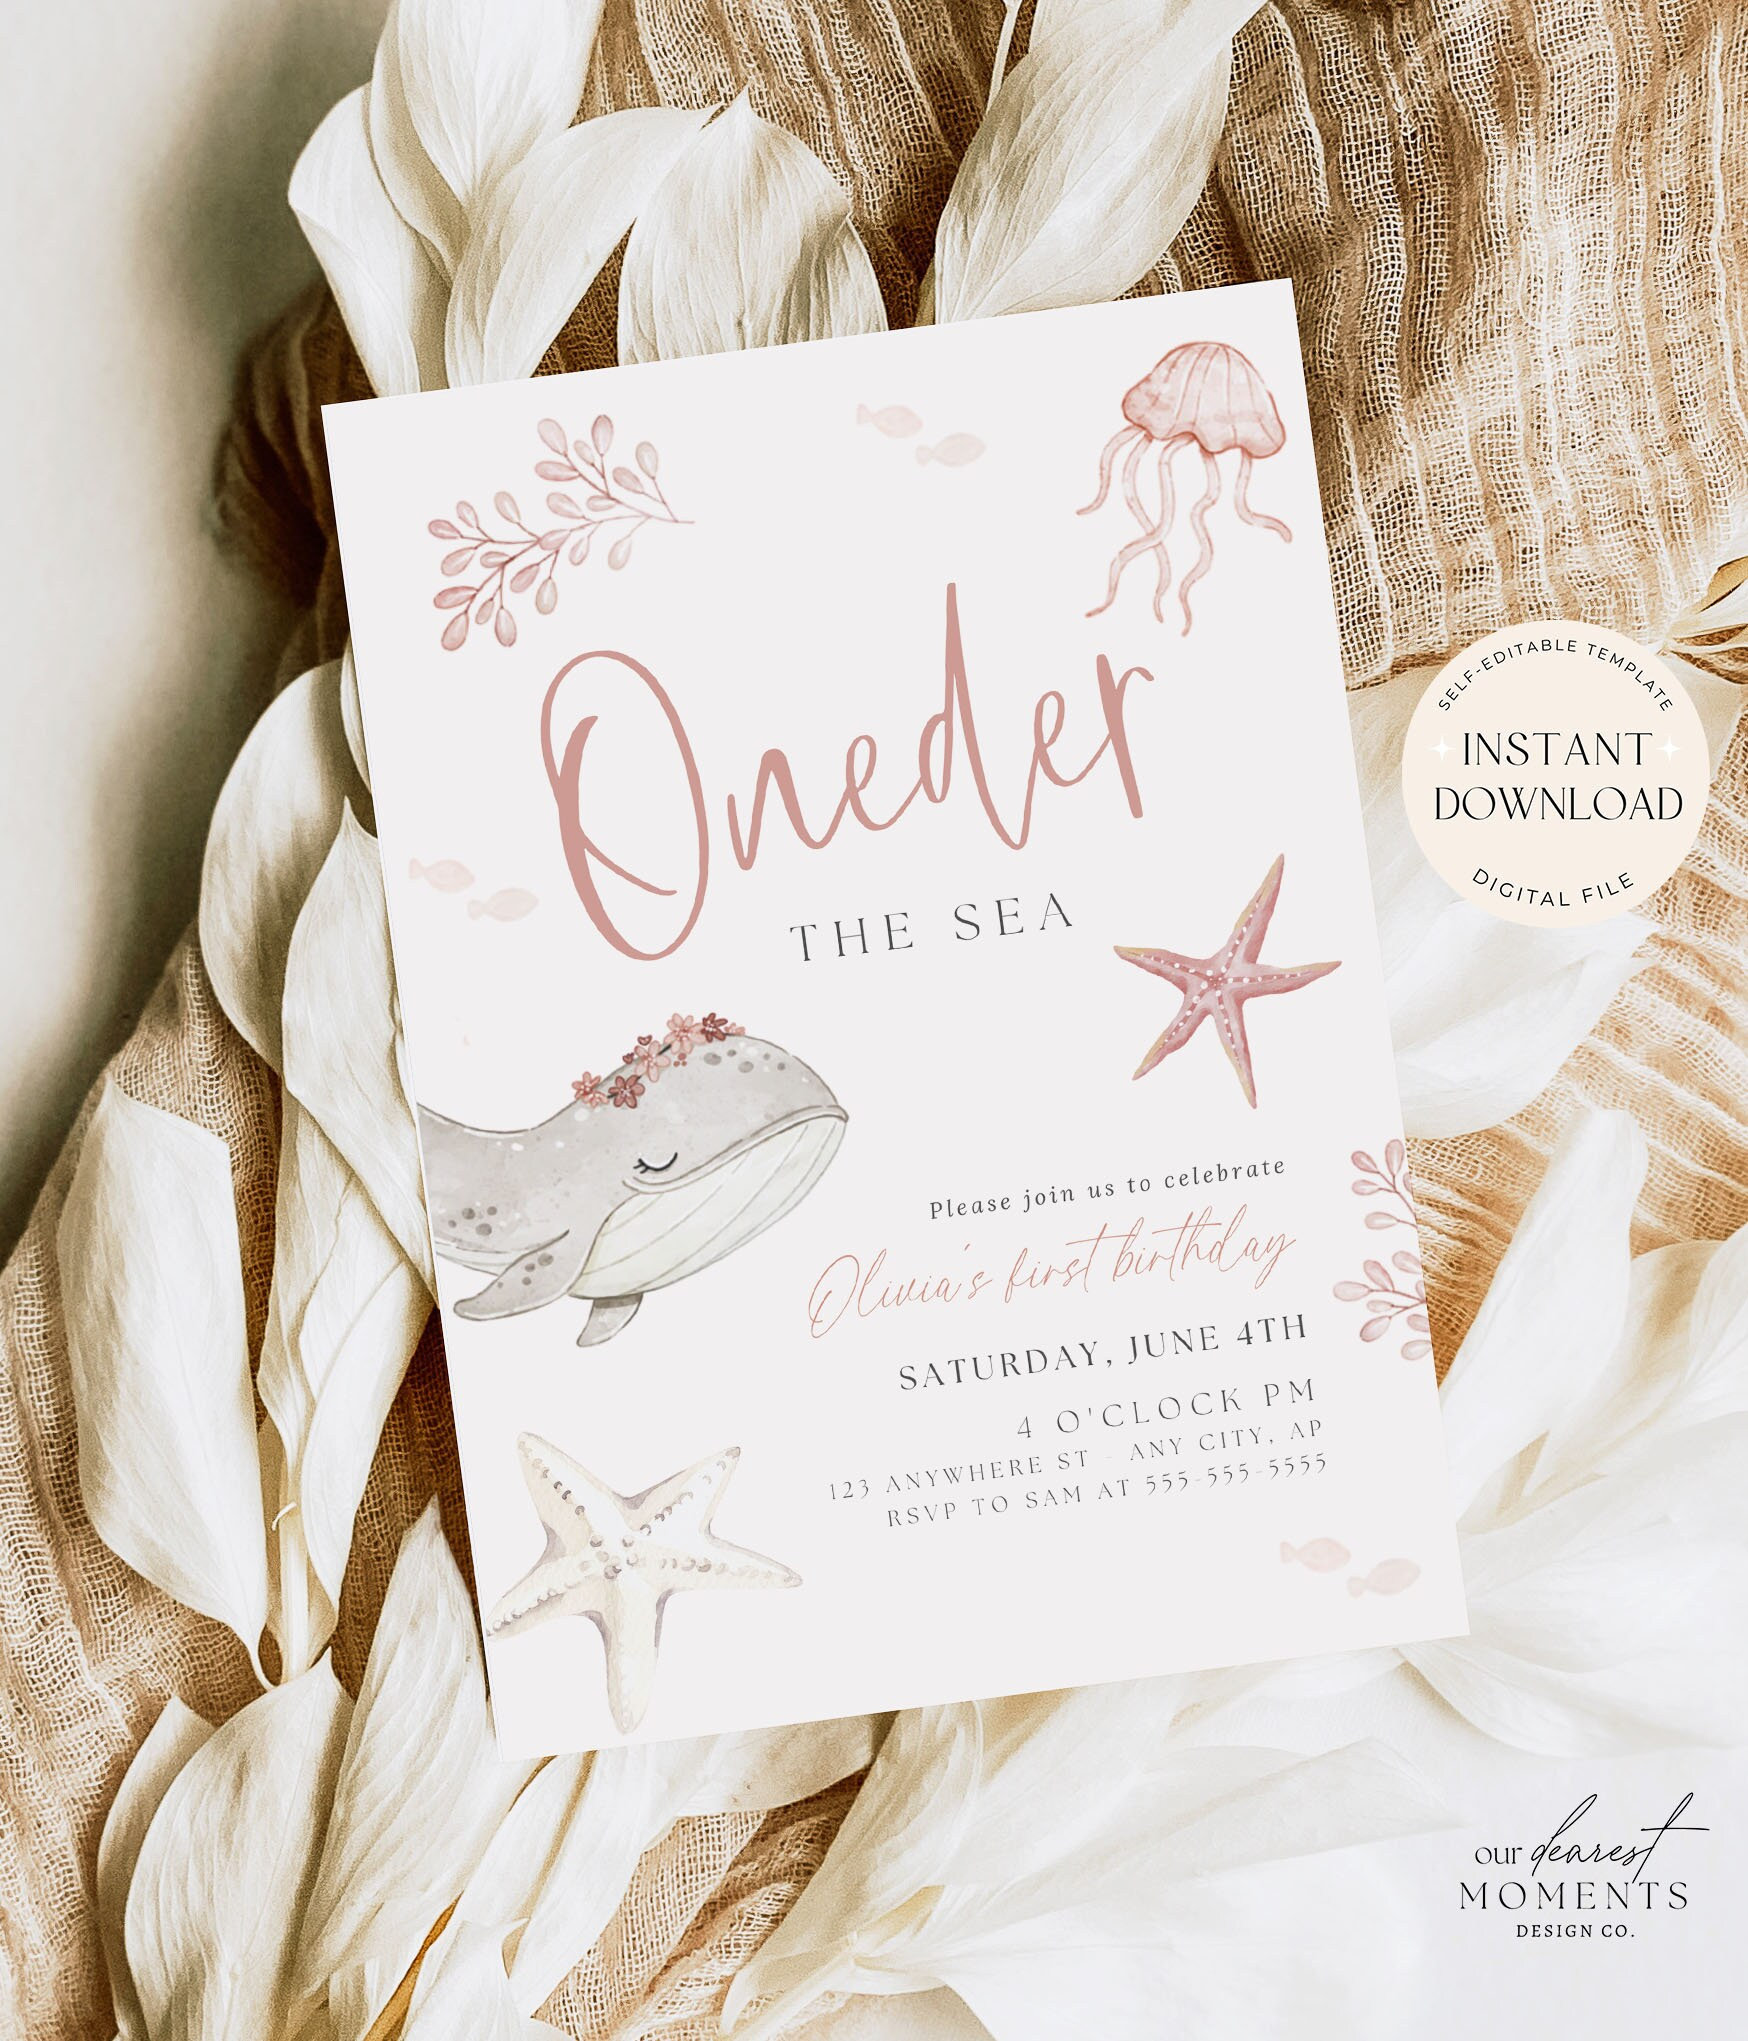 Oneder the Sea First Birthday -  UK